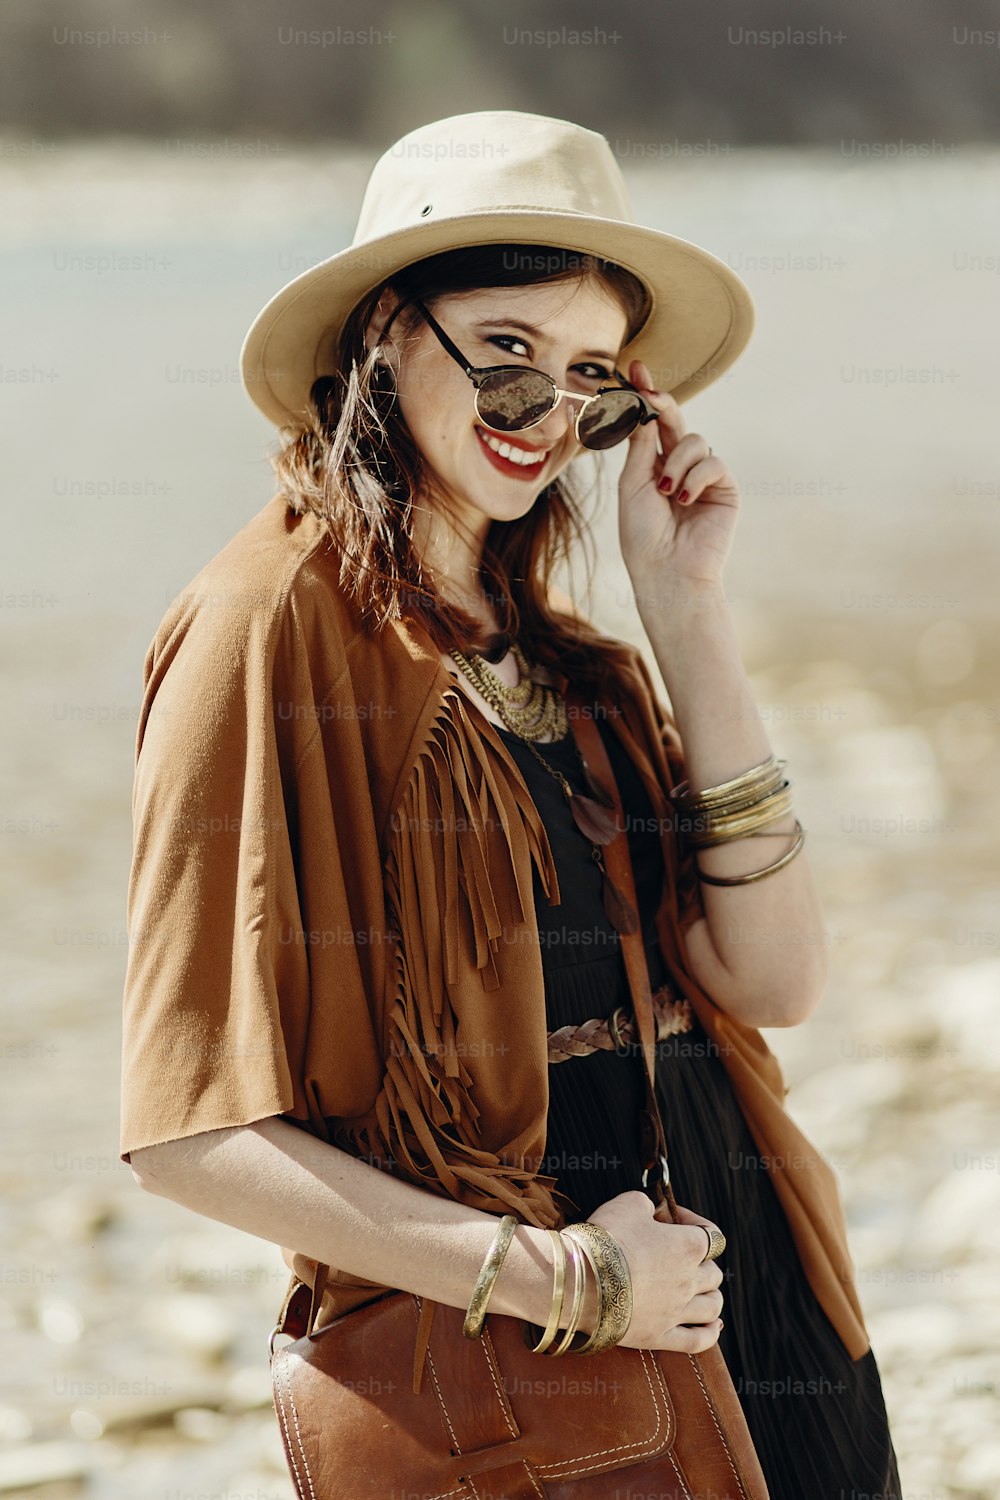 stylish hipster boho woman smiling in sunglasses with hat, leather bag, fringe poncho and accessory. traveler girl look, near beach in mountains. atmospheric moment. summer travel.